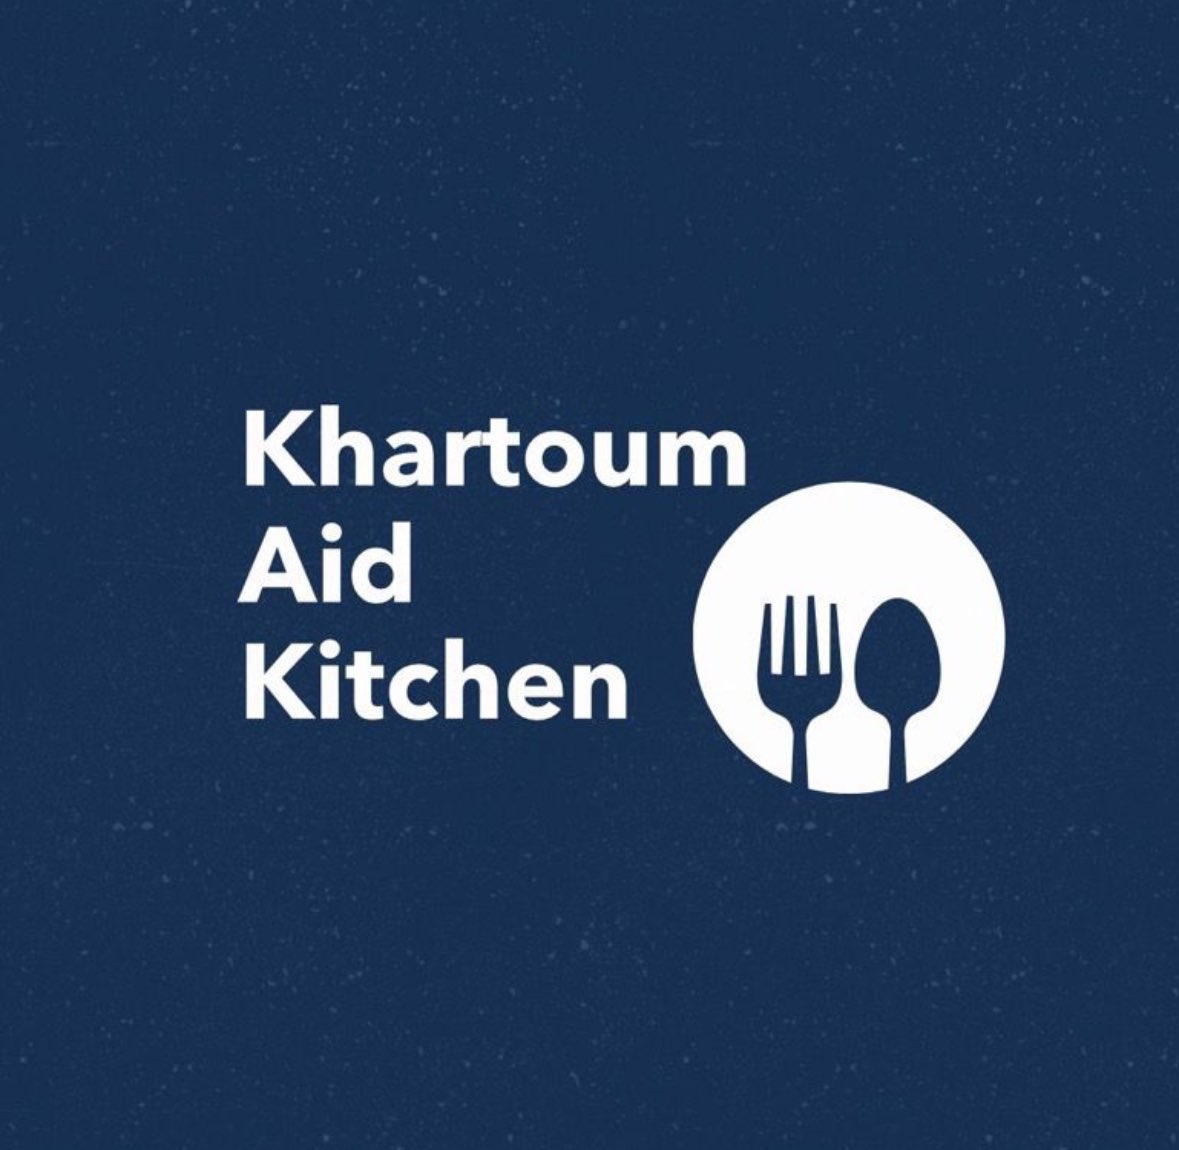 Most of Sudan is only one step away from a full blown famine. In a lot of areas the only thing stopping people starving is the presence of community kitchens. This is why we setup 3 kitchens in Khartoum State and are in the process of setting up a 4th. But there has been a…